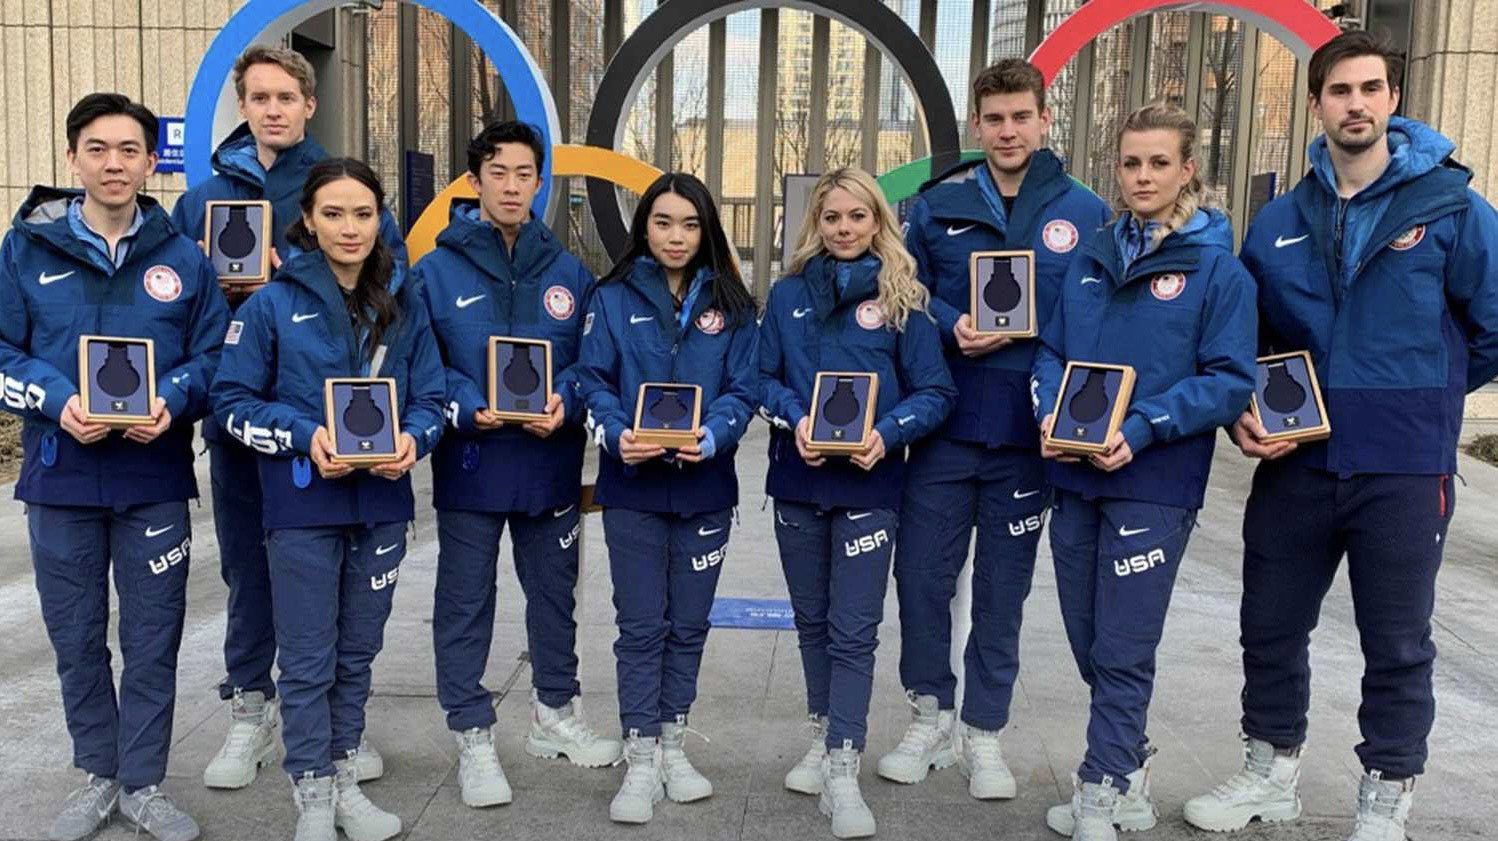 The second anniversary of the team figure skating event at Beijing 2022 could have passed before the United States find out whether they will be awarded the gold medals   ©U.S. Figure Skating